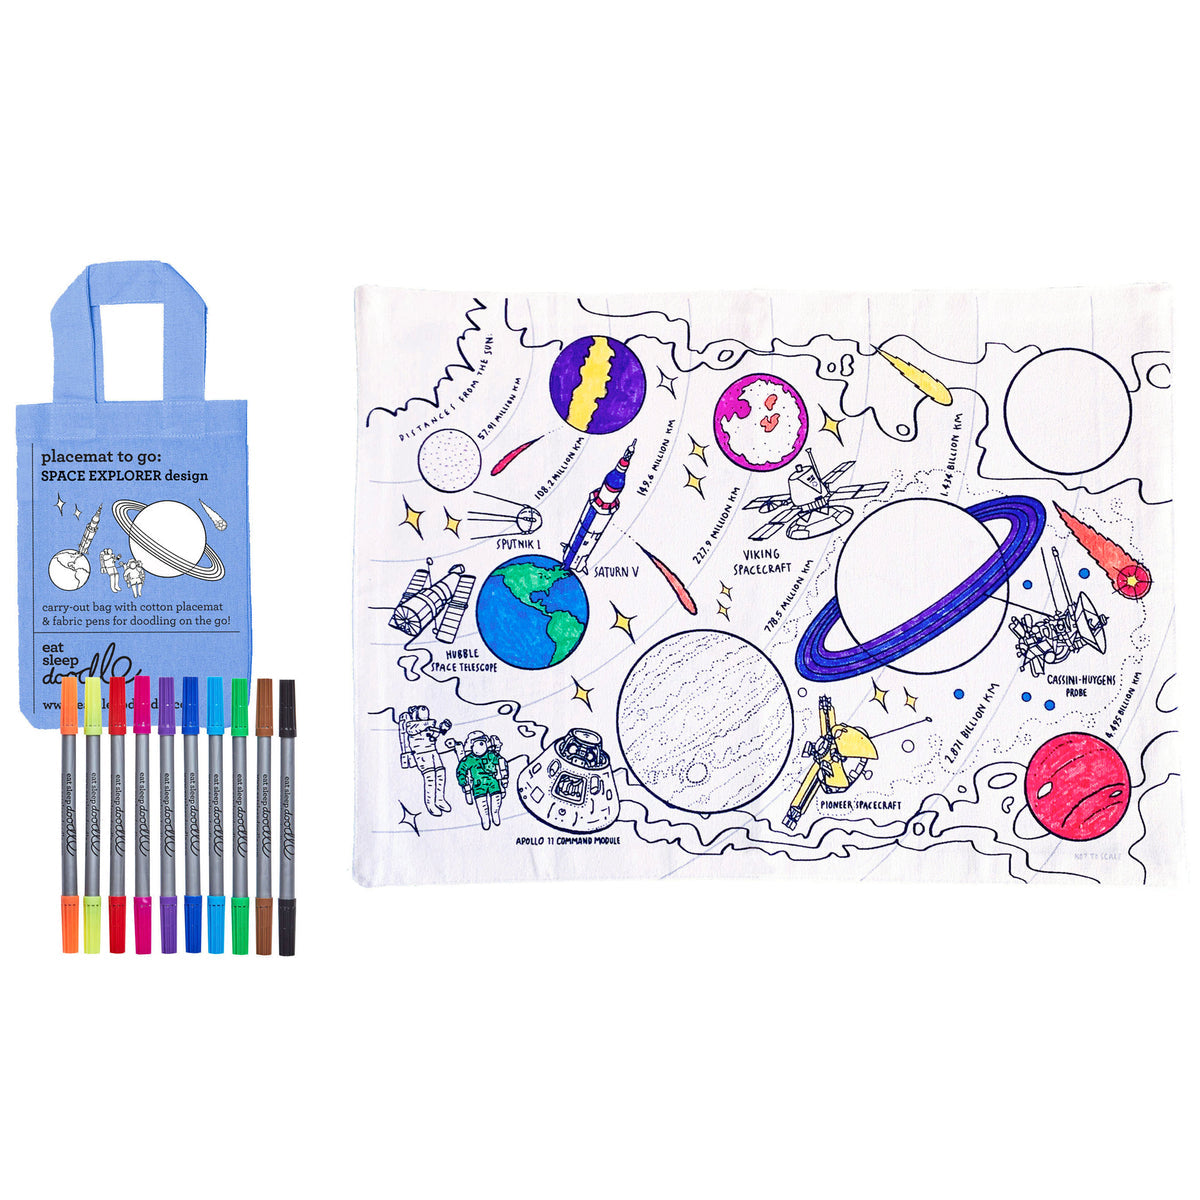 Space Explorer Placemat to go - Pens Included